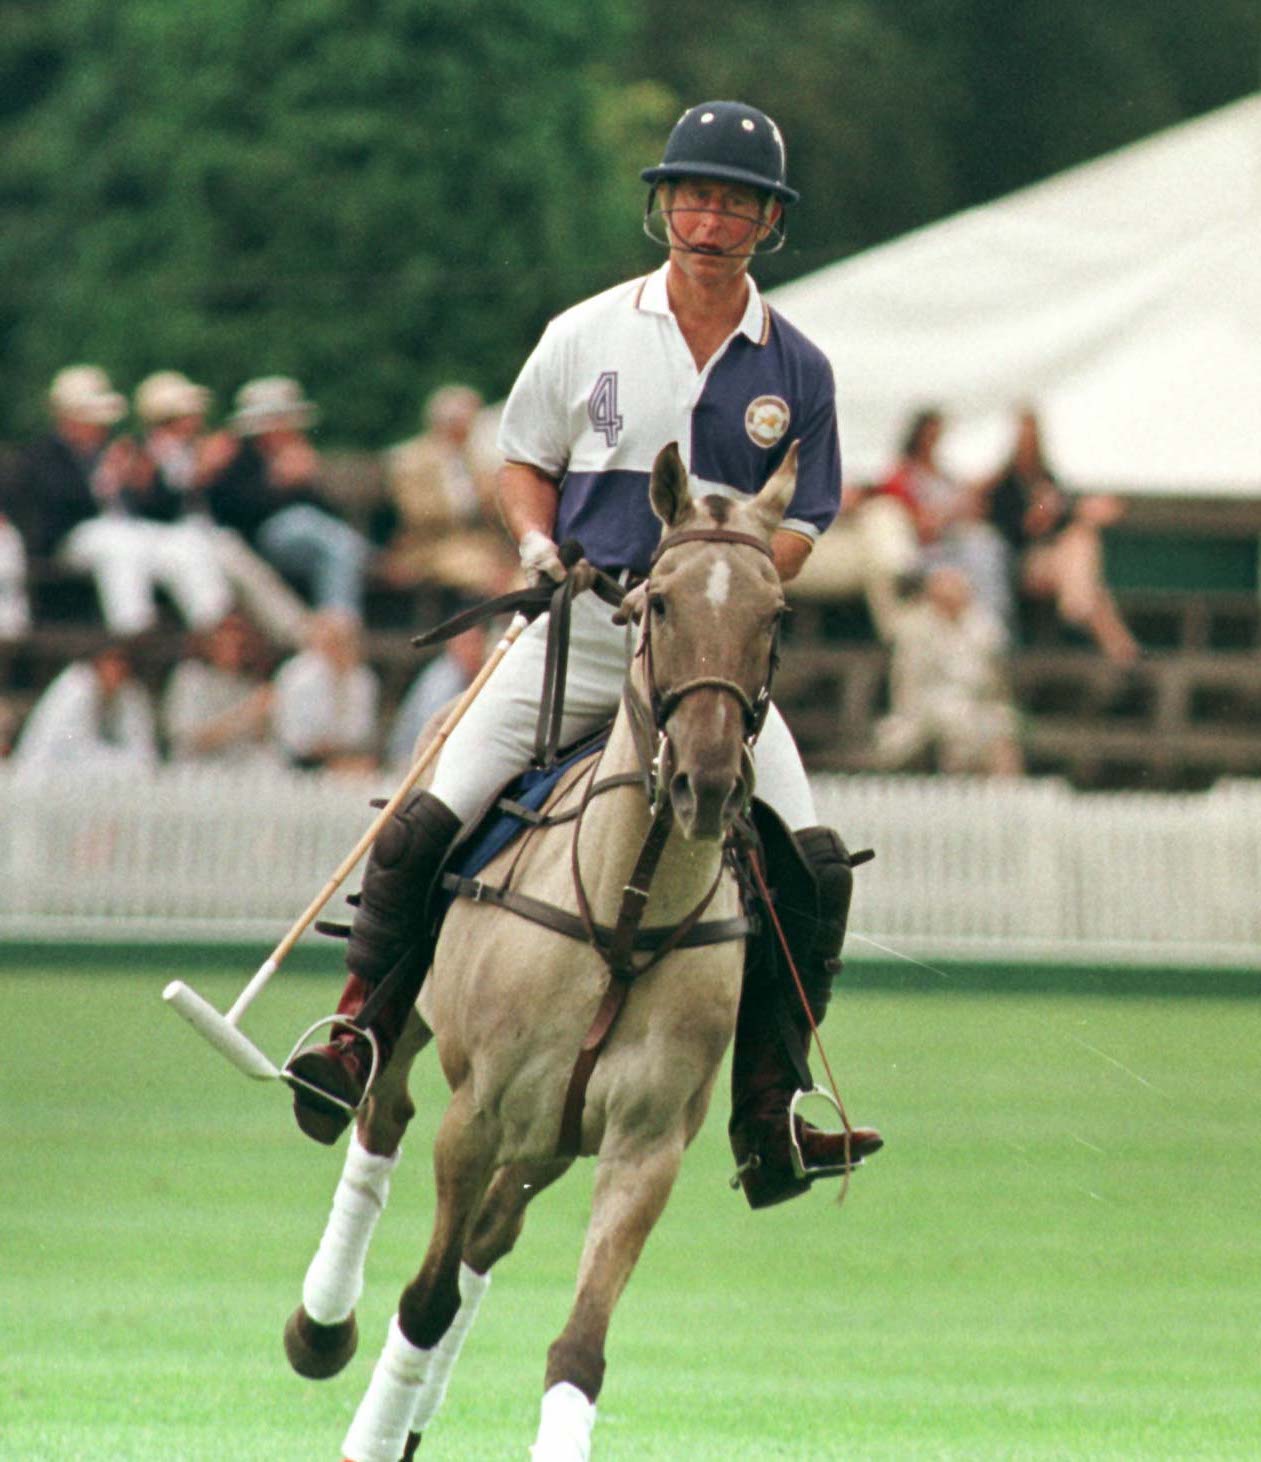 Prince Charles playing for Cirencester Park as they beat Foxcote in the Thomas Goode Centenary Cup at Cirencester Park Polo Club on July 6, 1997 | Source: Getty Images